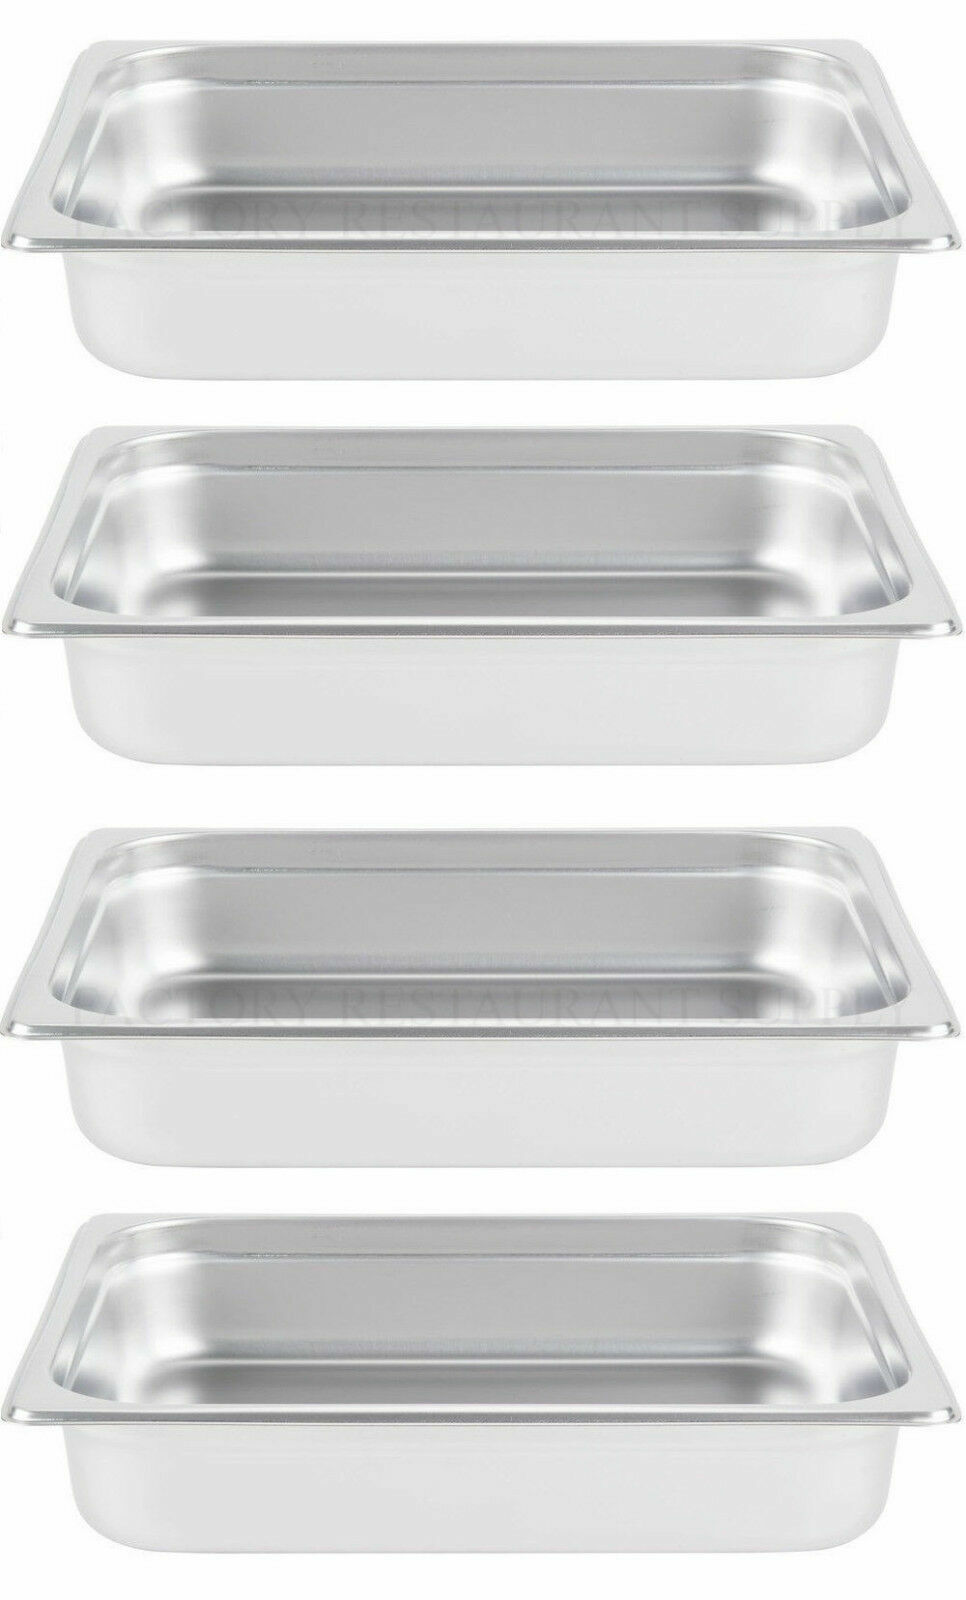 HALF INSERTS ONLY 4 PACK 2 1/2" Deep Stainless Steel Chafing Dish Chafer Pan Choice 4070229 - фотография #2